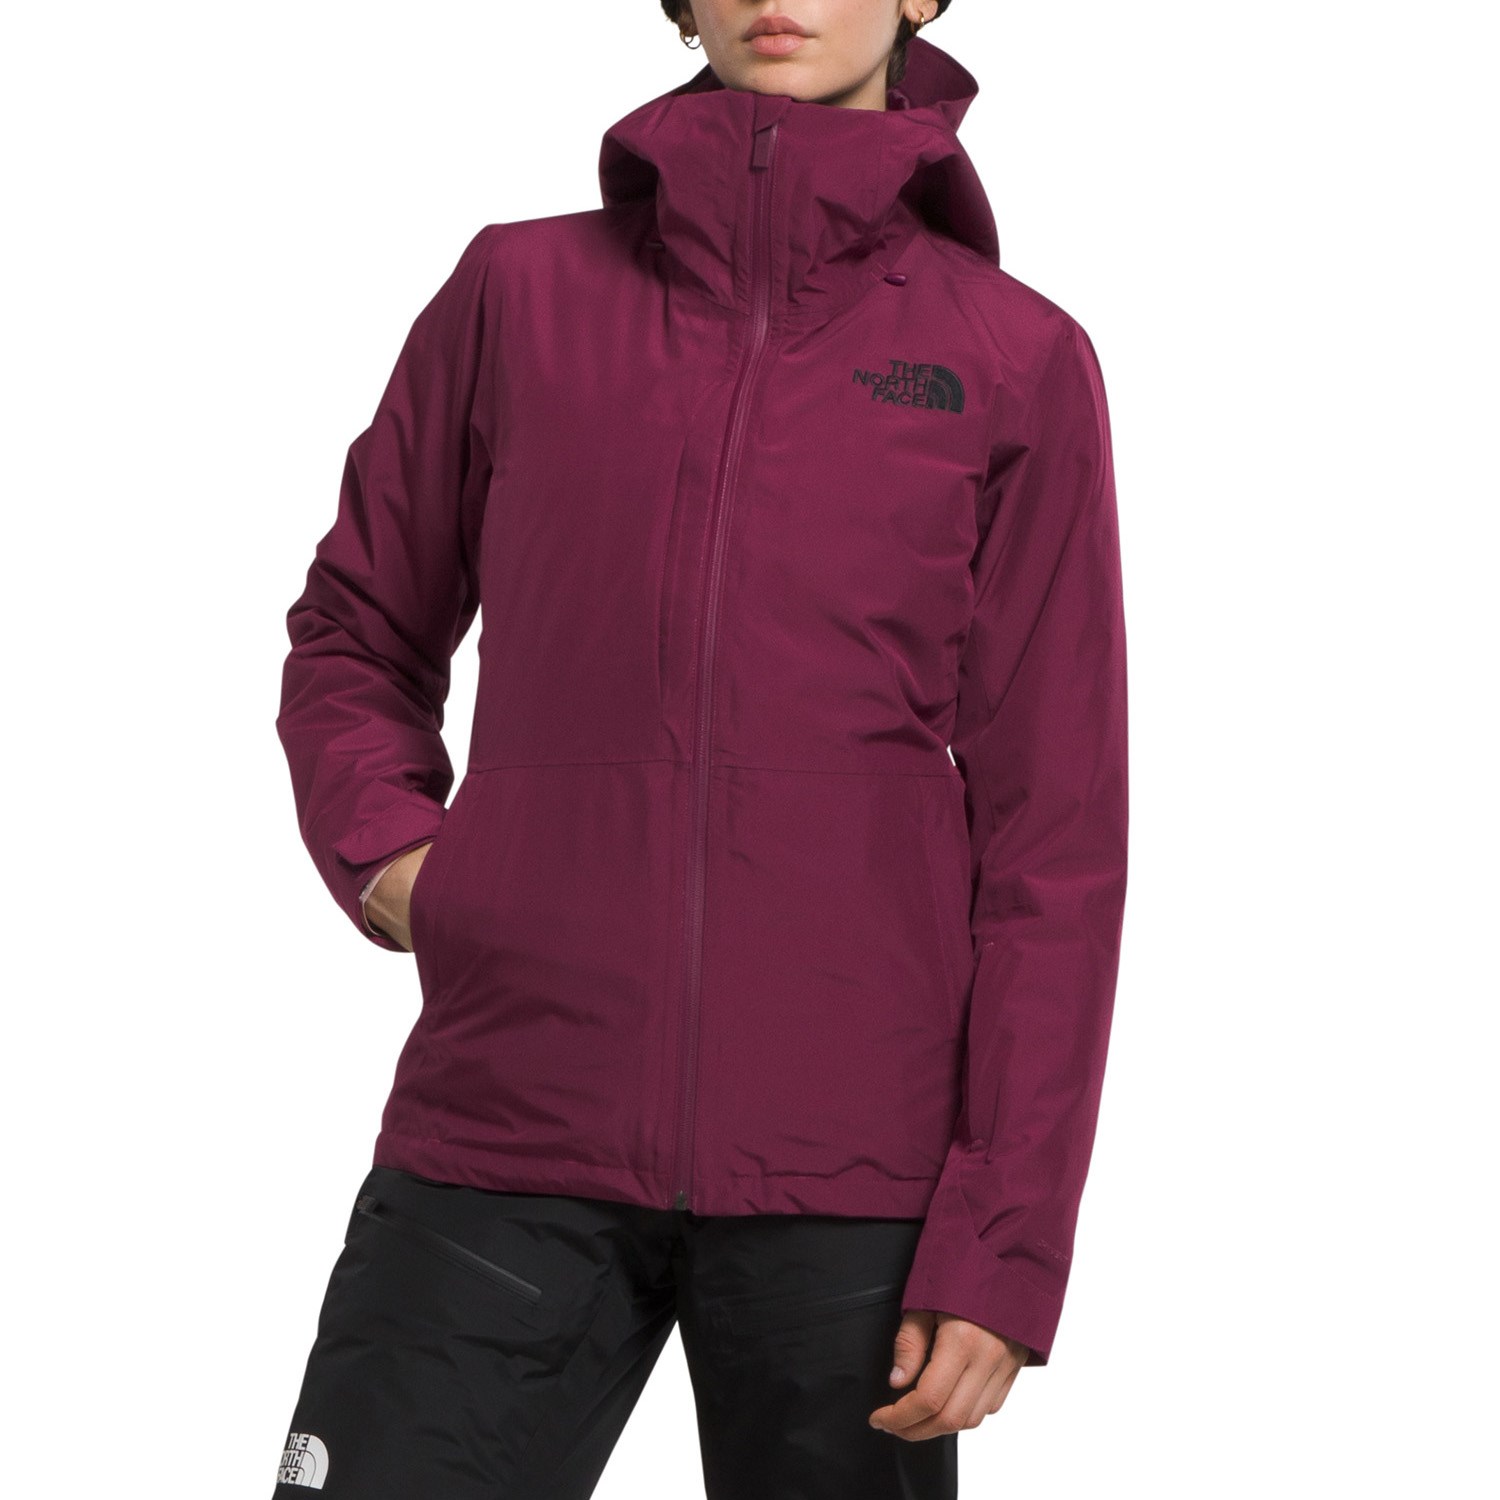 Куртка The North Face ThermoBall Eco Snow Triclimate, цвет Boysenberry куртка thermoball eco snow triclimate мужская the north face черный